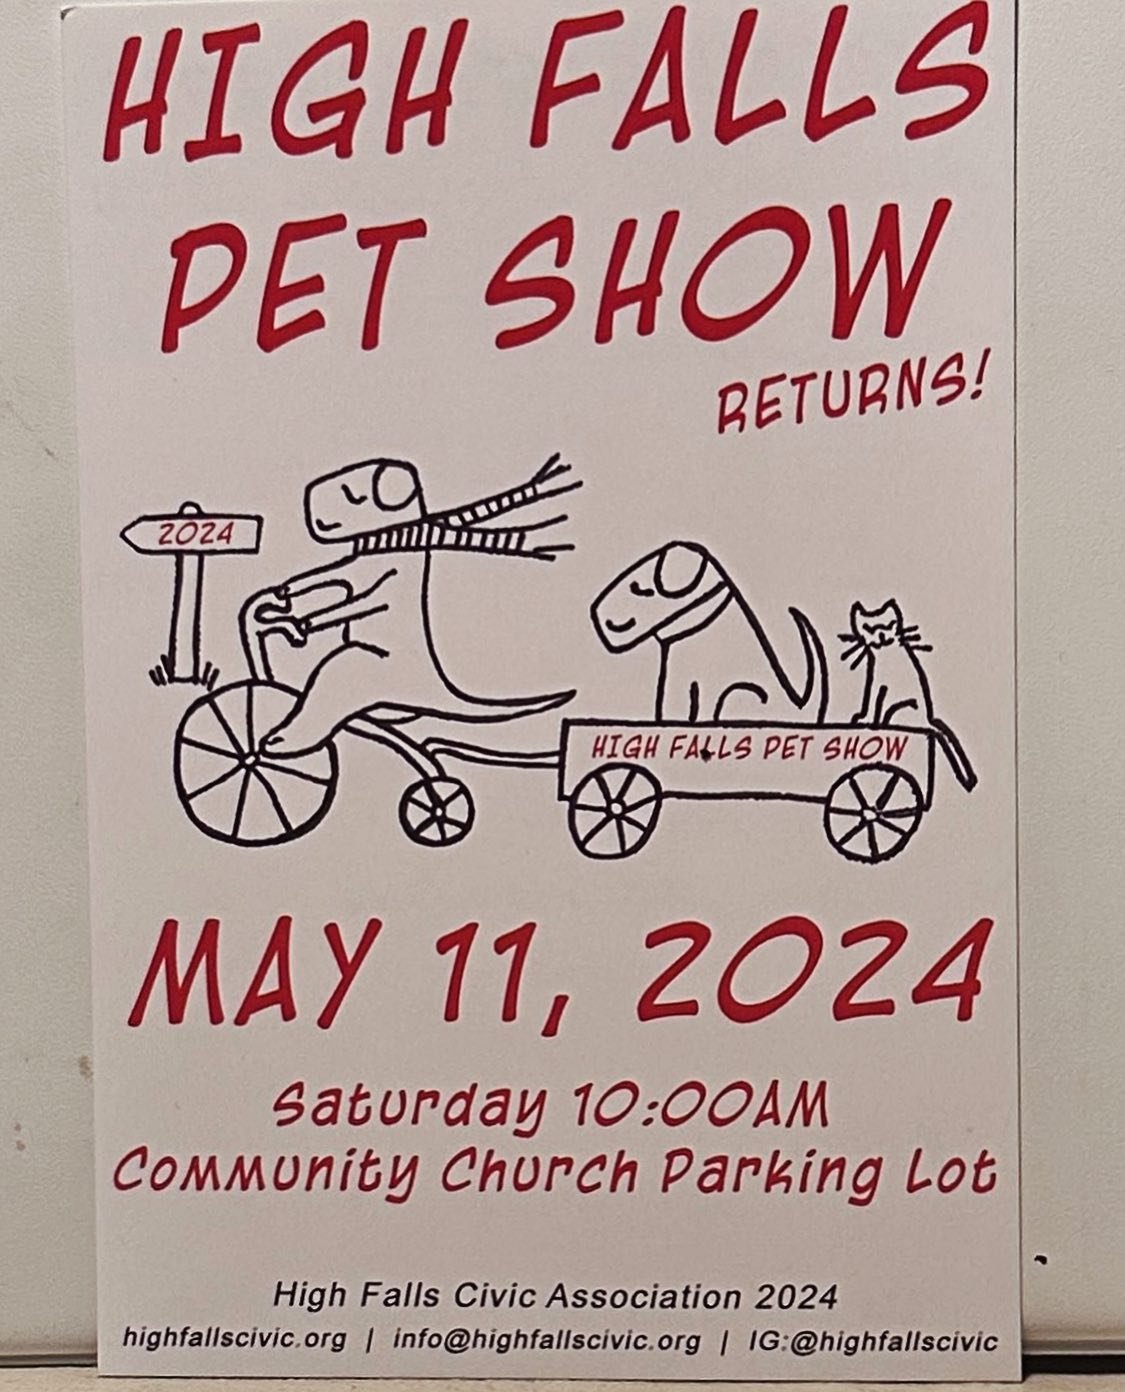 Just a few hours to go before the High Falls Pet Show starts. Animals on parade, free advice from veterinarians, pet treats, animal themed greeting cards and socks, mini flea market and raffle benefiting pets in need. And good weather! What more can 